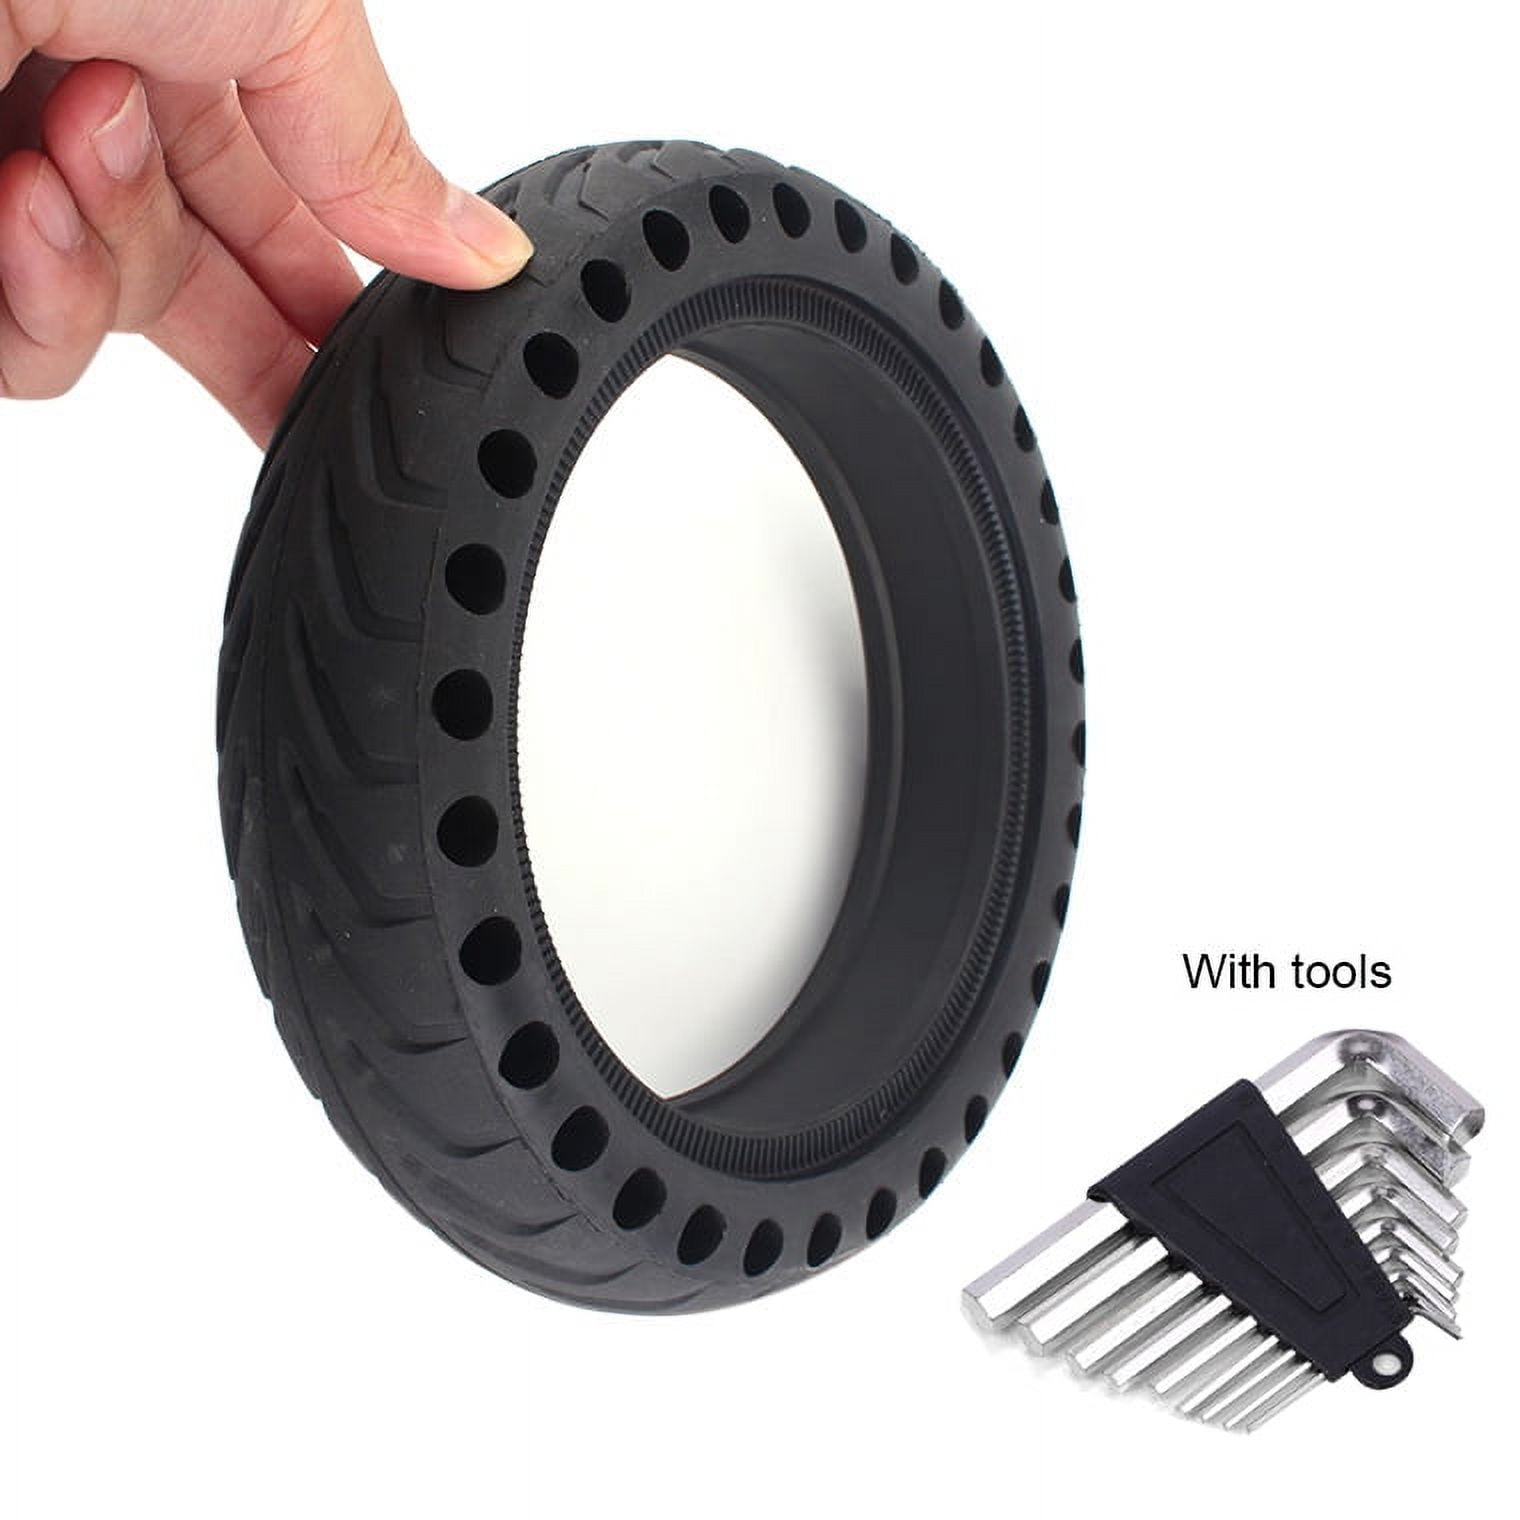  GLDYTIMES 50/75-6 8.5x2.0 Off-road Replacement Tire - 9 Inch  9x2.25 Solid Tire Fit for Gotrax GXL V2 XR/Apex XL/G3 Plus~Hiboy S2~Xiaomi  M365~AOVOPRO ES80, Explosion-proof Anti-slip Tubeless Tyre(2pcs) : Sports &  Outdoors